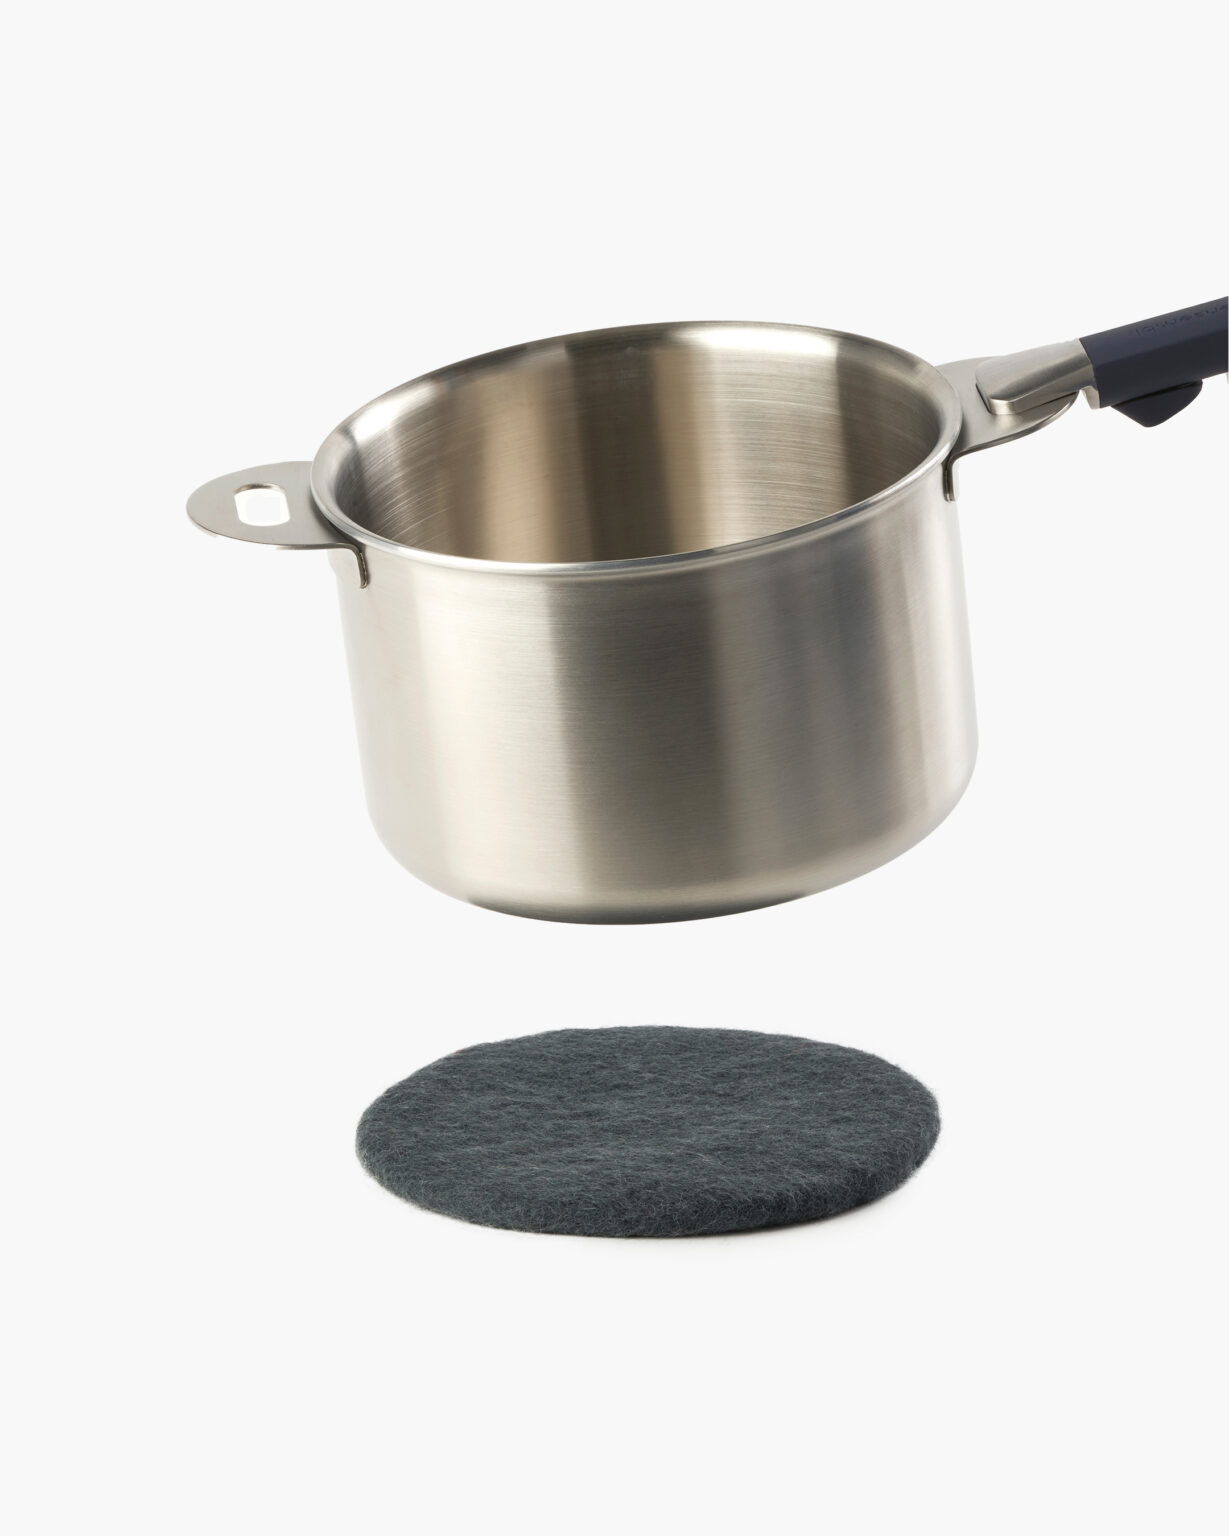 Shop ENSEMBL Ecological Wool Trivet for Stainless Steel Fully Clad Cookware. Multifunctional, long-lasting, design-forward home wares. Protect your table from heat while you serve. Best Wool Trivet. 100% Wool. Vesterbro Grey Trivet.